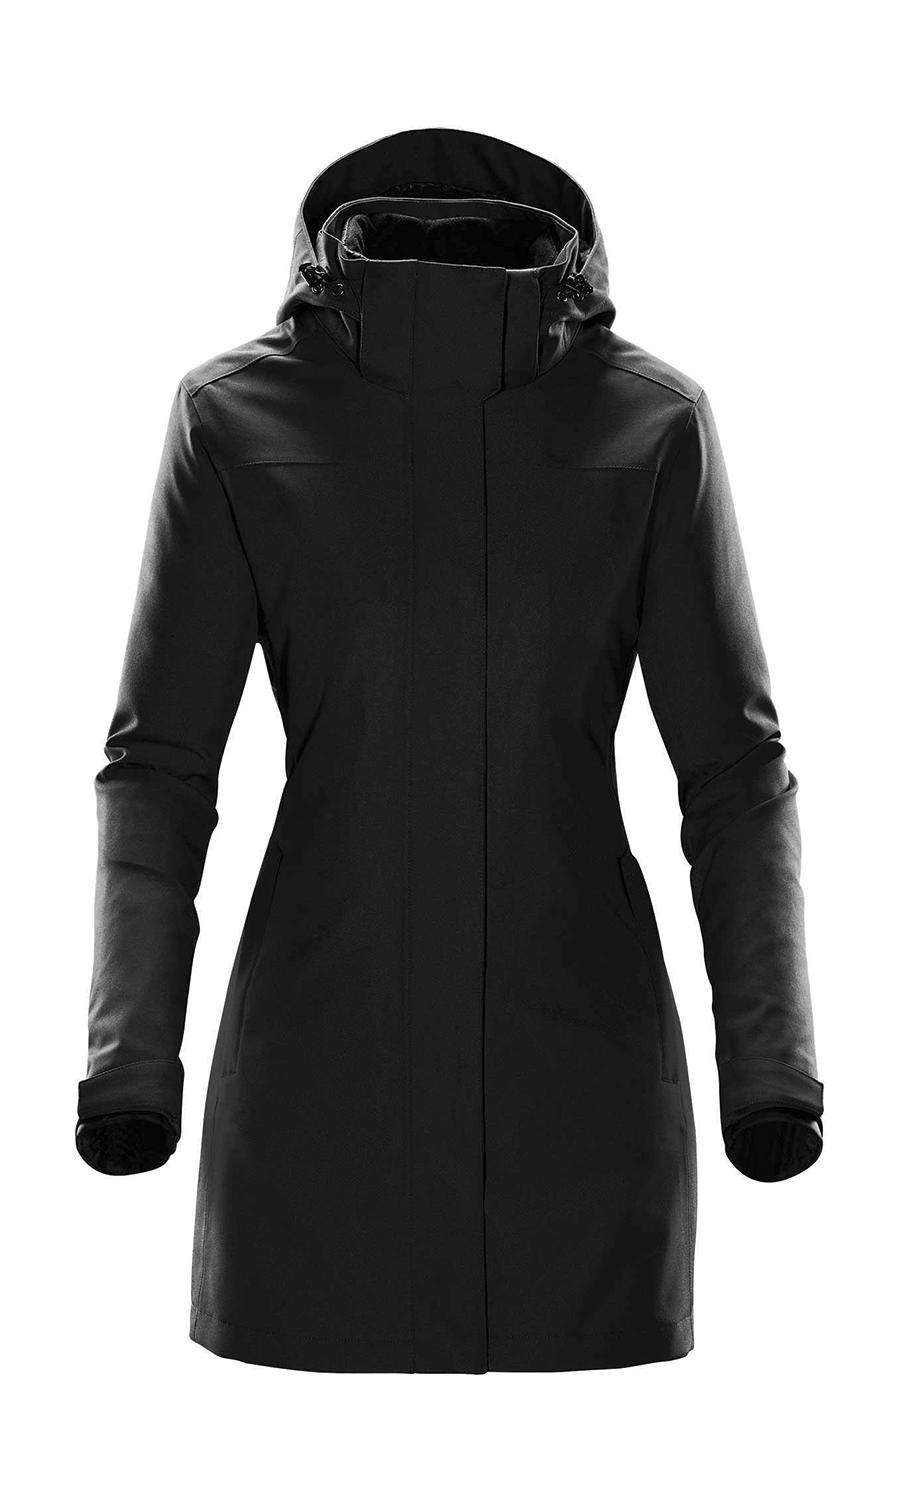  Womens Avalanche System Jacket in Farbe Black